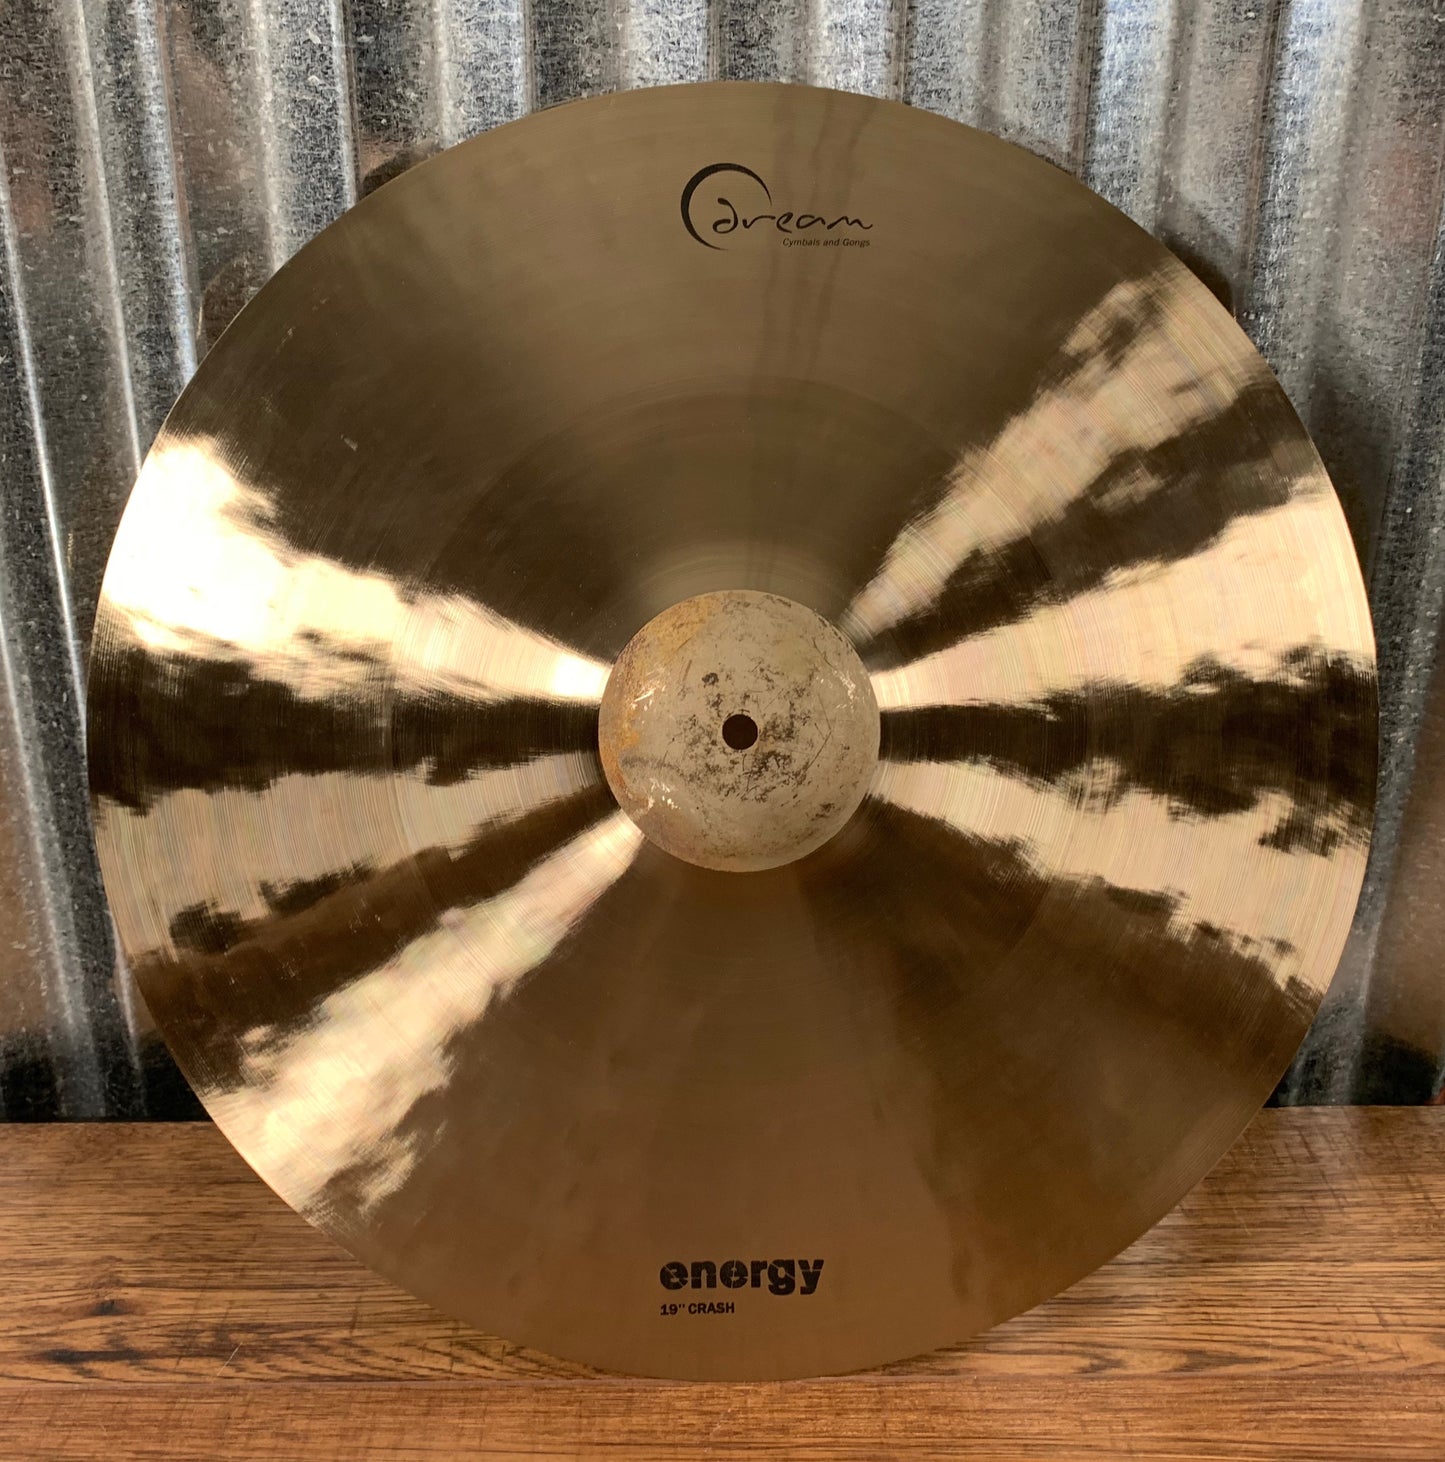 Dream Cymbals ECR19 Energy Series Hand Forged & Hammered 19" Crash